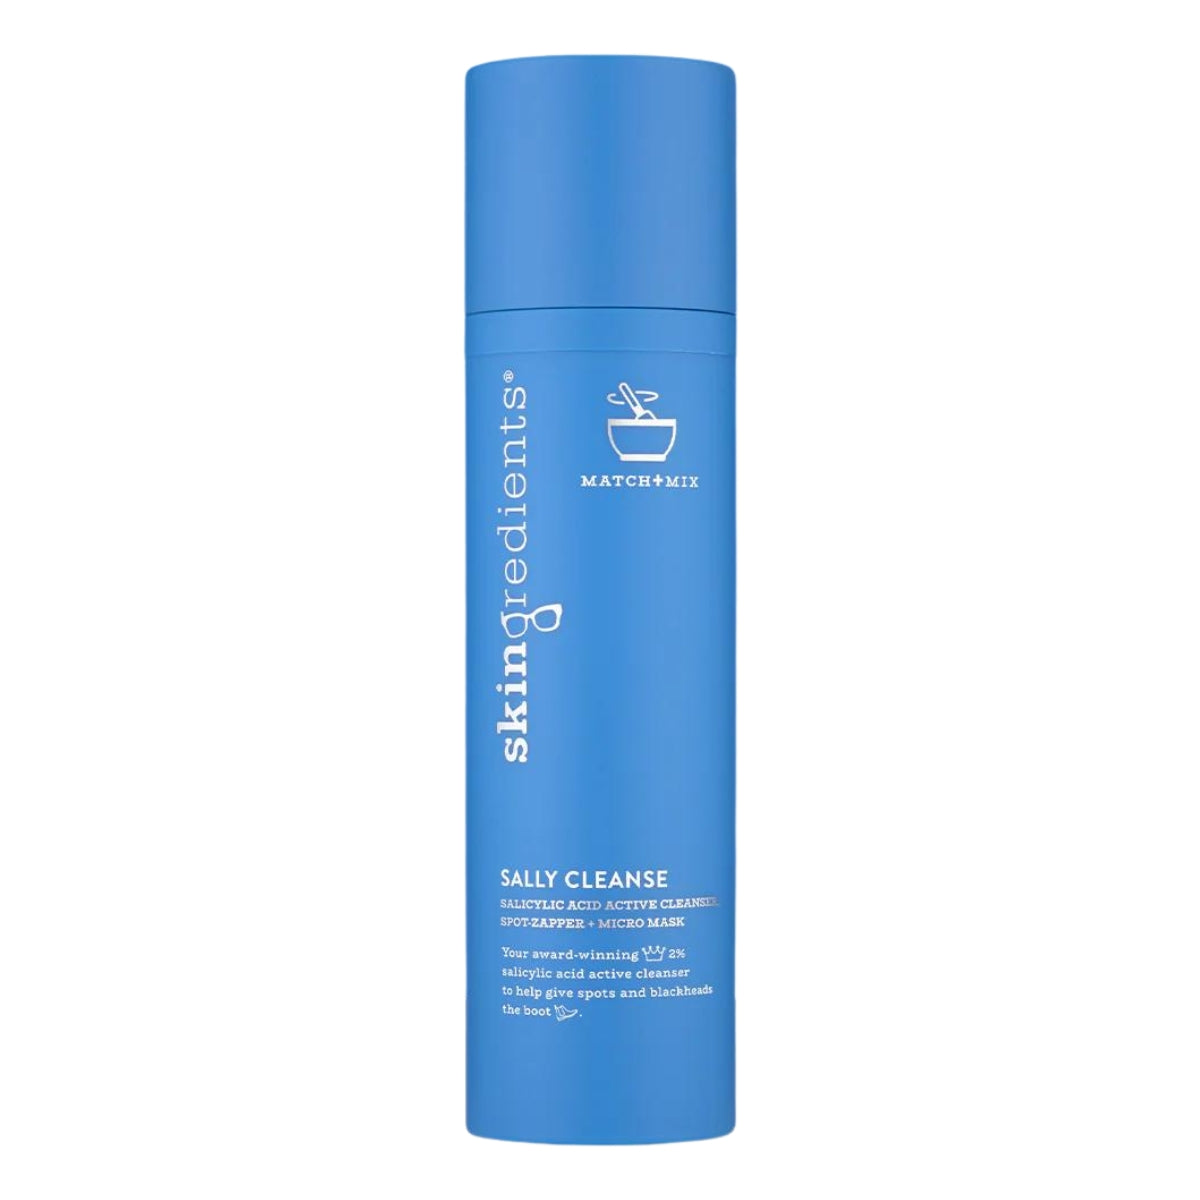 Skingredients Sally Cleanse Cleanser